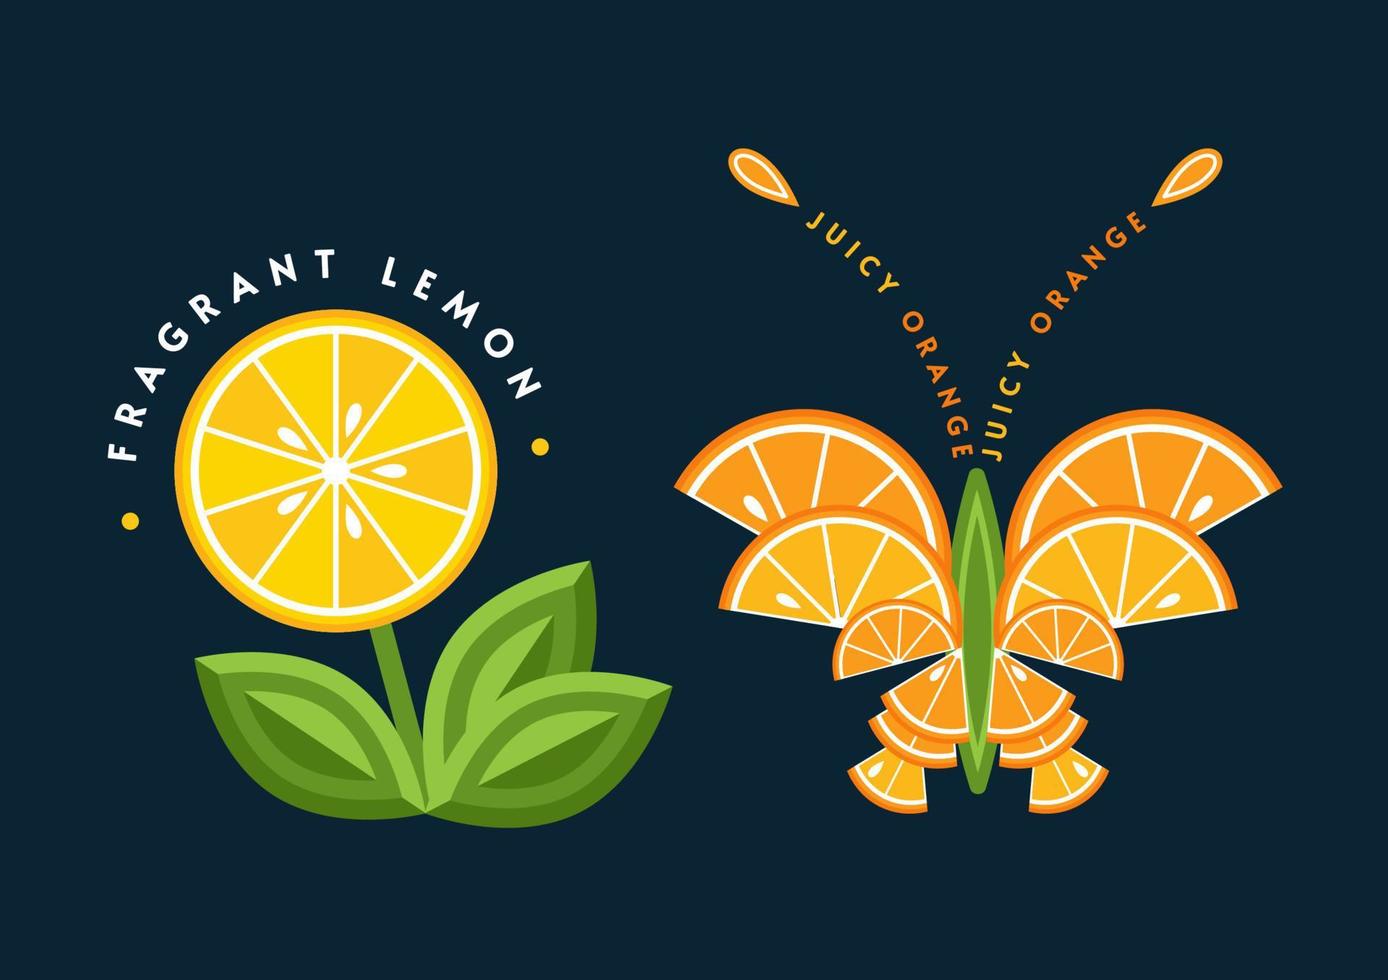 Set of logos, emblems, badges with orange, lemon, green leaves, fruit slices in a shape of butterfly, flower. Good for decoration of food packaging, groceries, agriculture stores, advertising. Flat vector